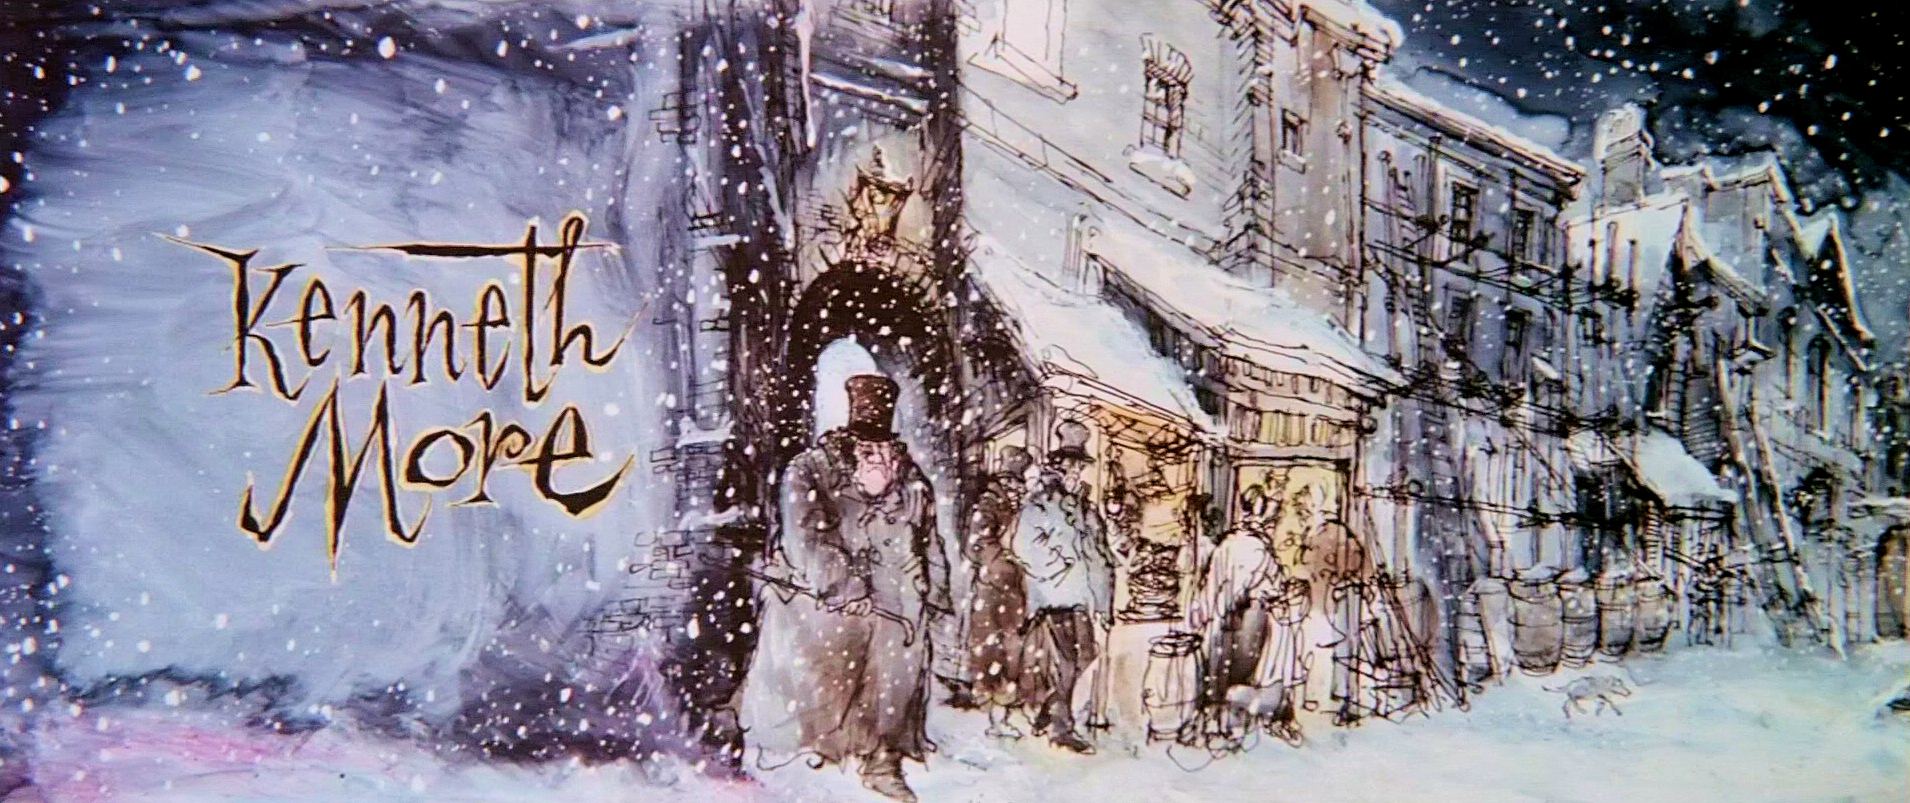 Main title from Scrooge (1970) (7). Kenneth More